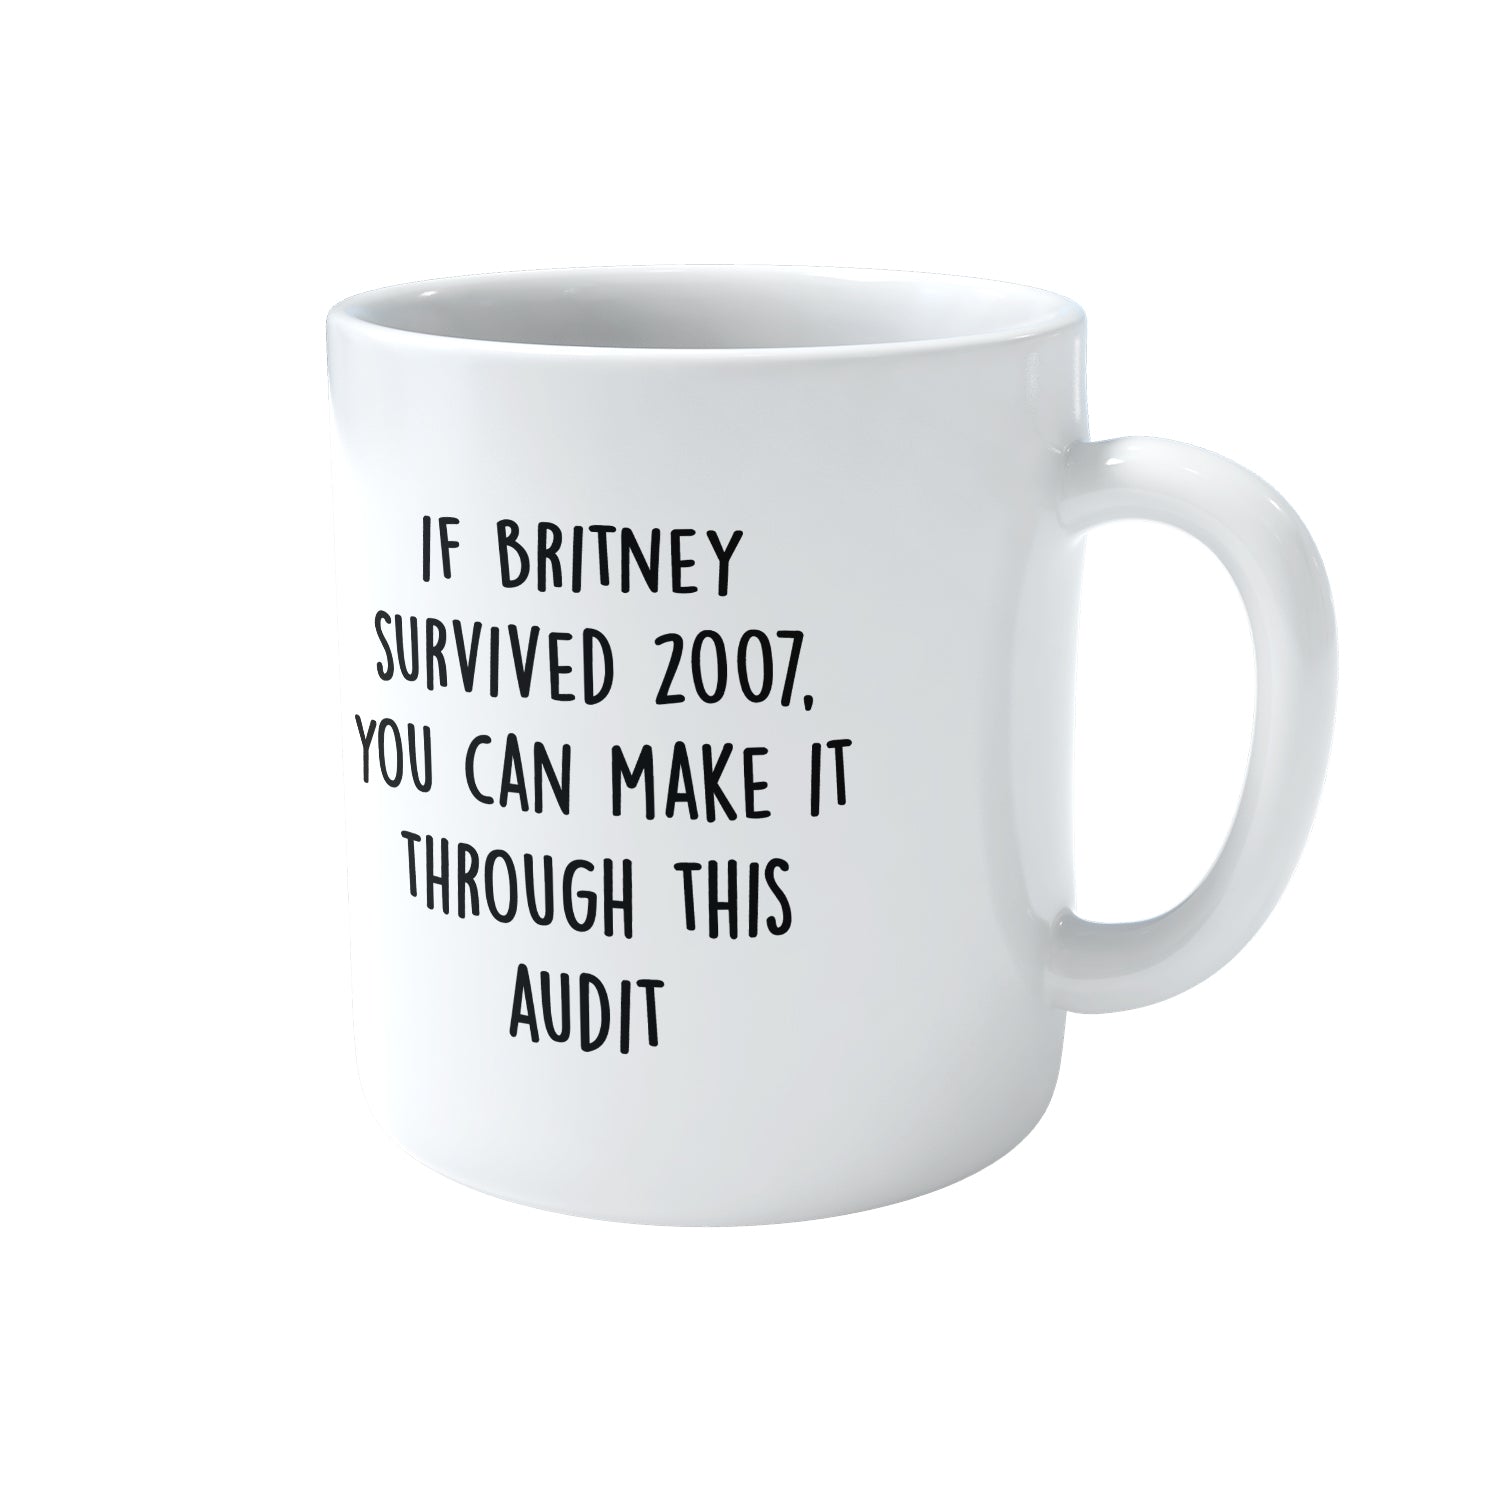 If Britney survived 2007, you can make it through this audit Mug